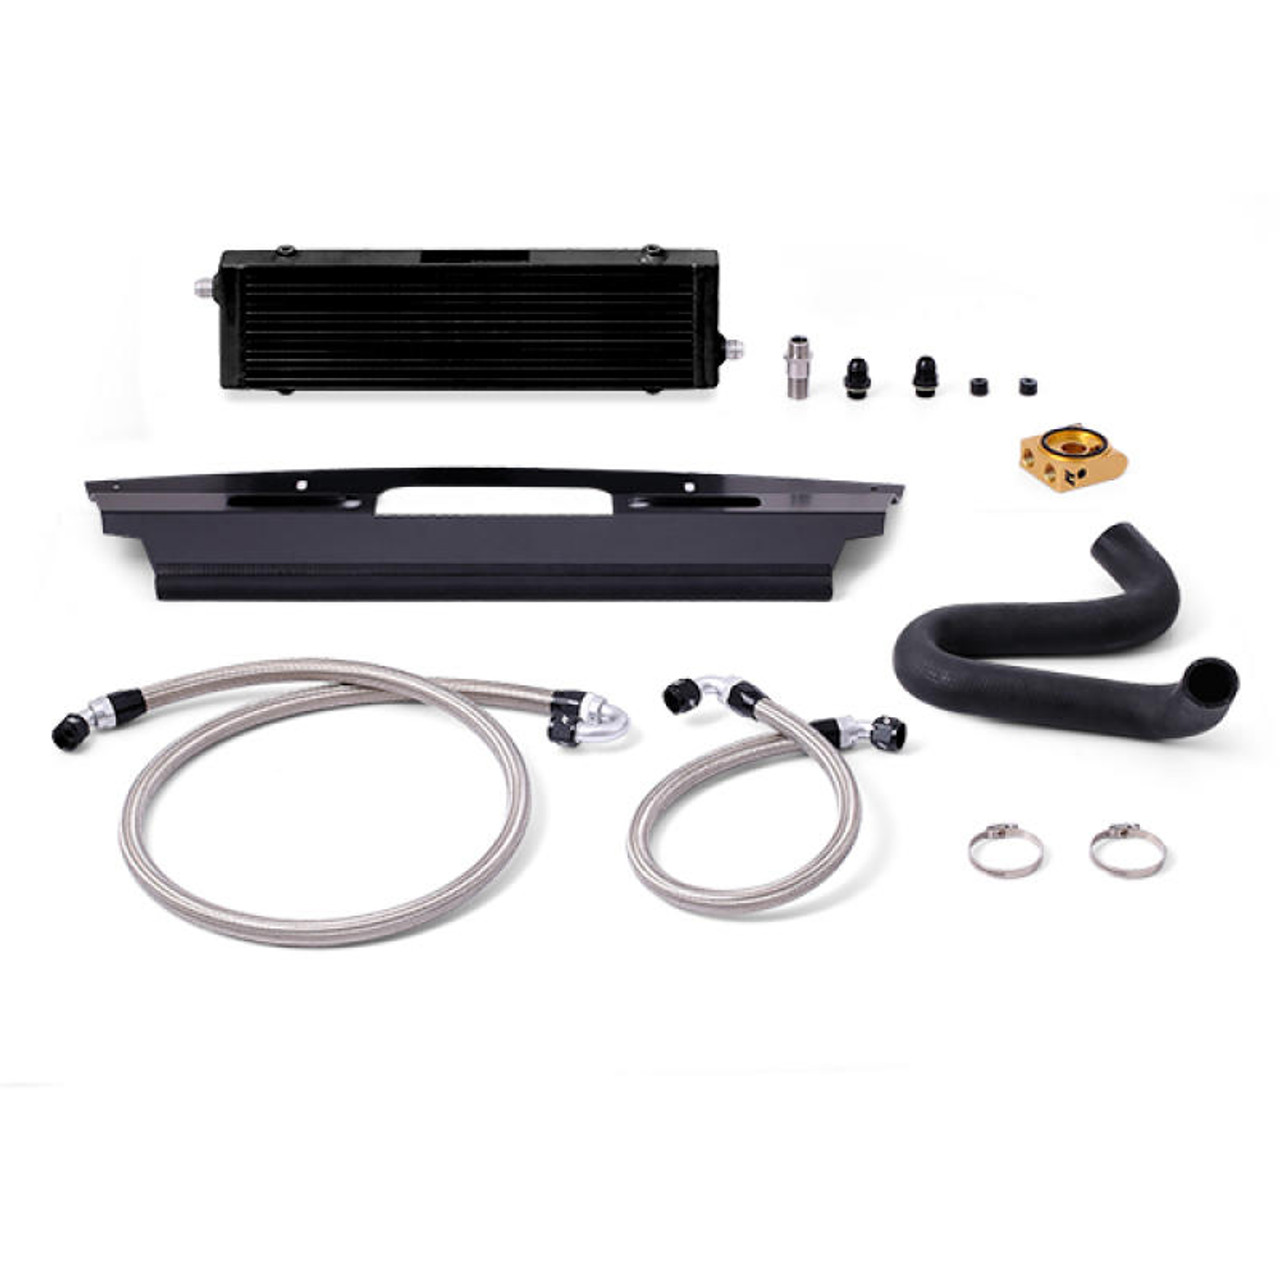 Mishimoto 2015 Ford Mustang GT Thermostatic Oil Cooler Kit - Black - MMOC-MUS8-15TBK